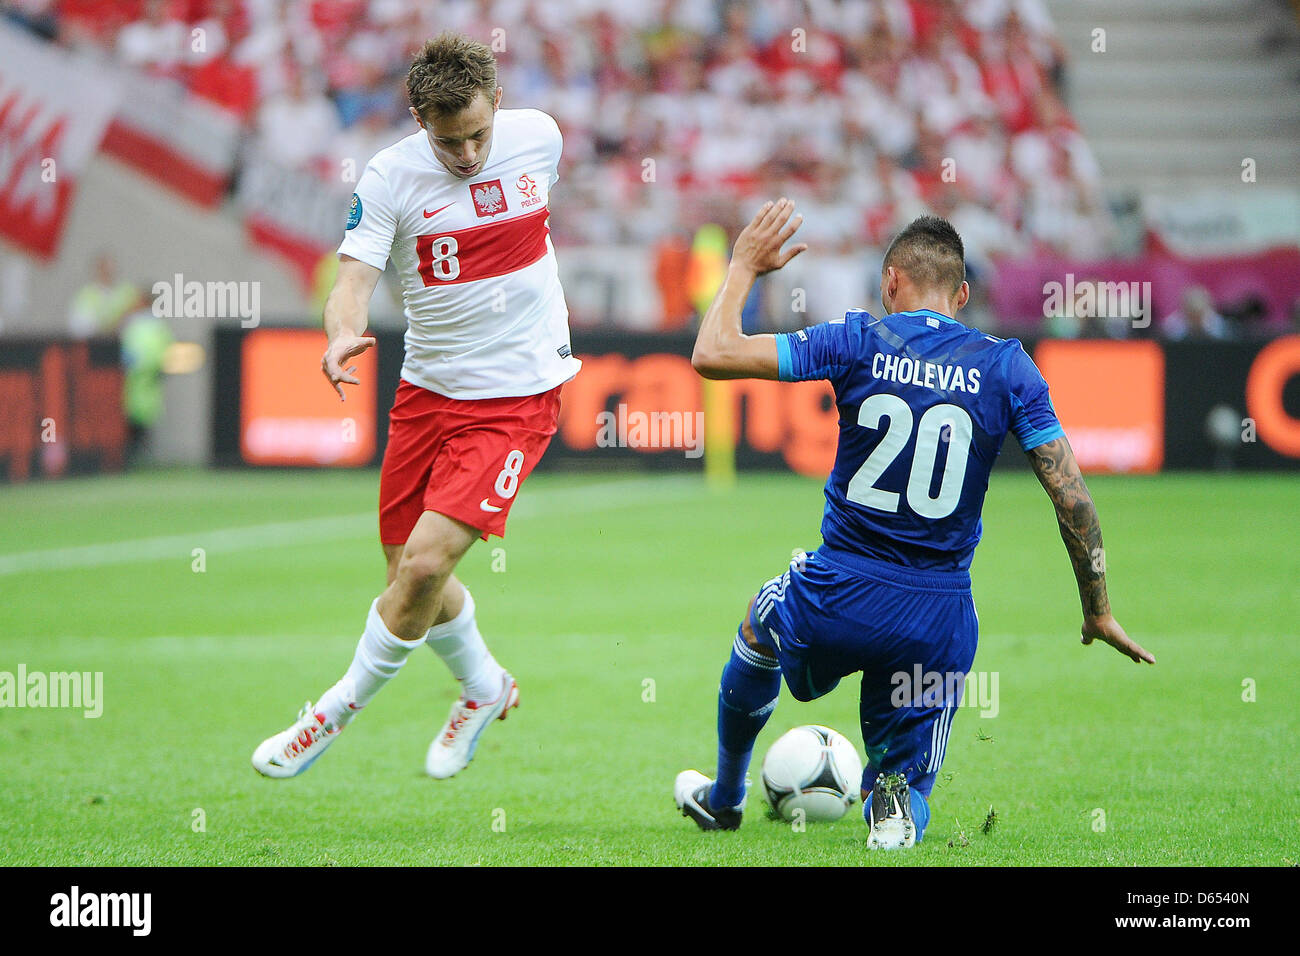 Poland's Maciej Rybus (L) vies for the ball with Greece's Jose Holebas during the UEFA Euro 2012 match between Poland and Greece at the national stadium in Warsaw, Poland, 08 June 2012. Photo: Pressfocus / Revierfoto Stock Photo